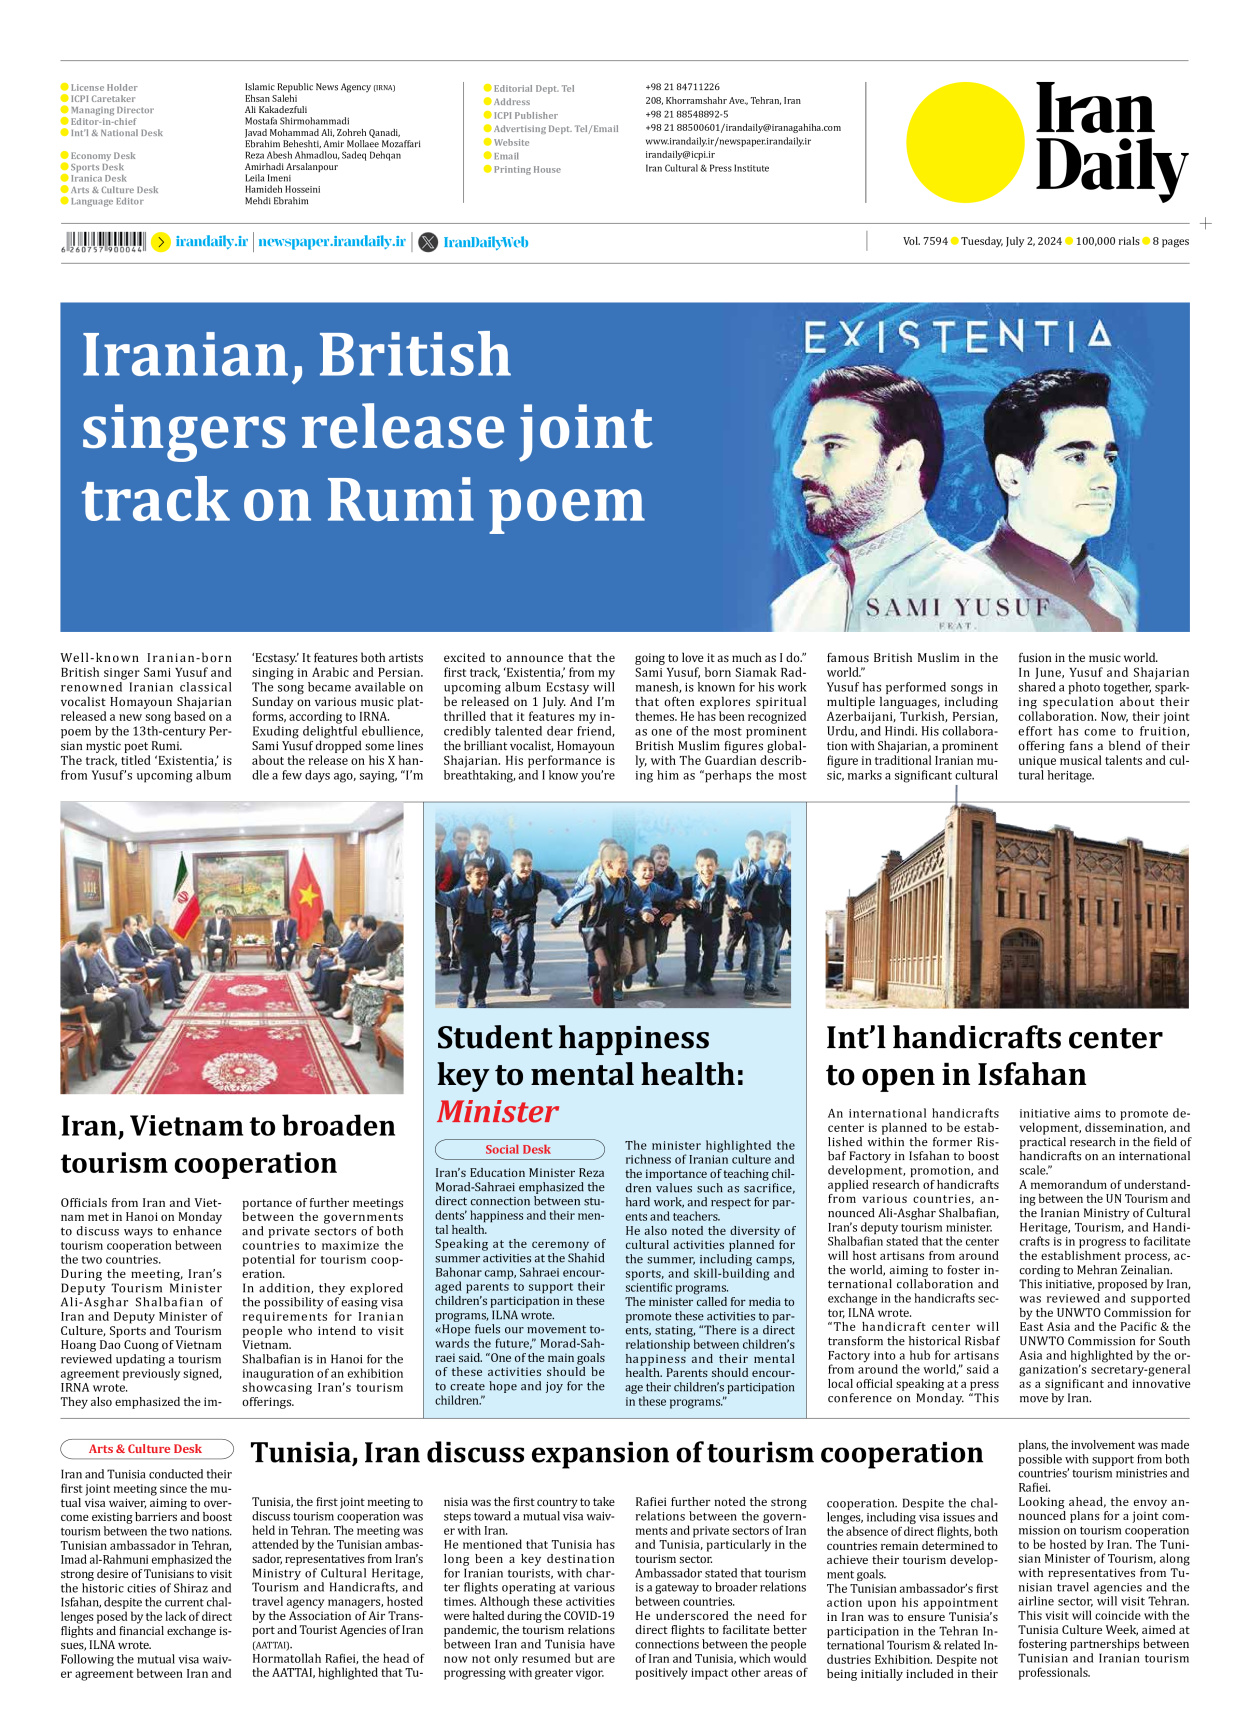 Iran Daily - Number Seven Thousand Five Hundred and Ninety Four - 02 July 2024 - Page 8